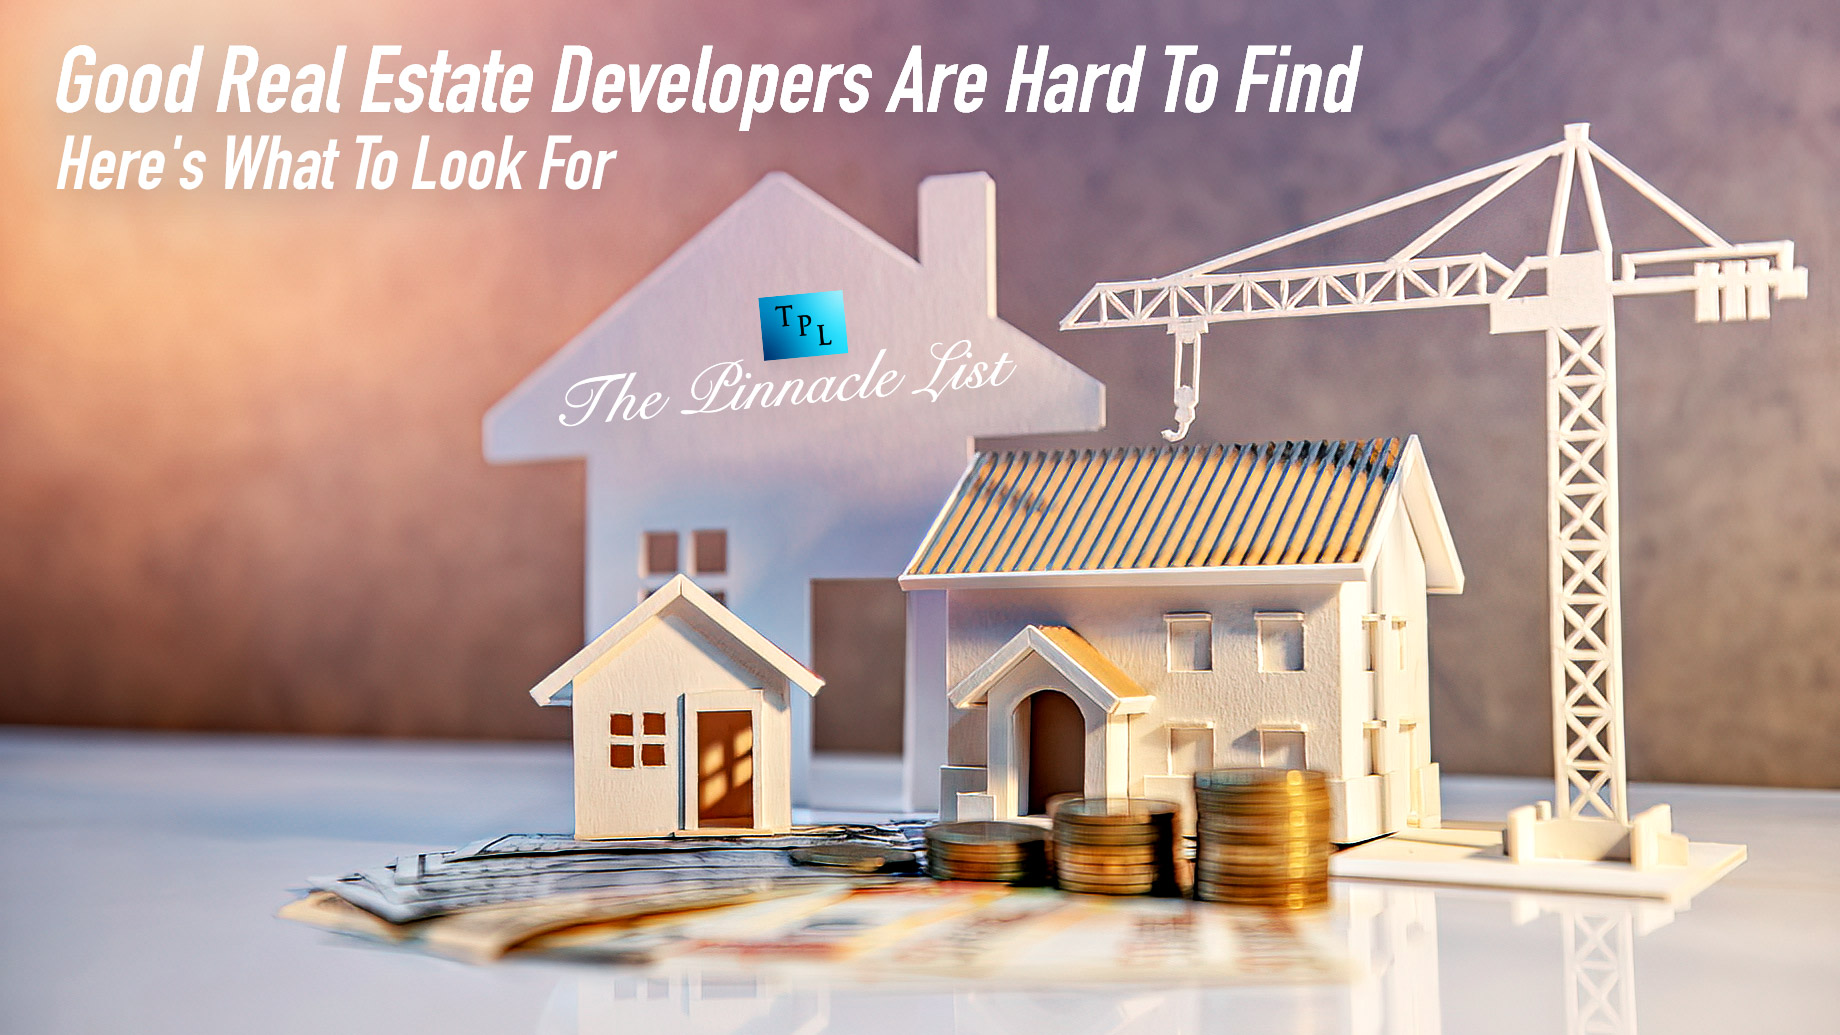 Good Real Estate Developers Are Hard To Find - Here's What To Look For